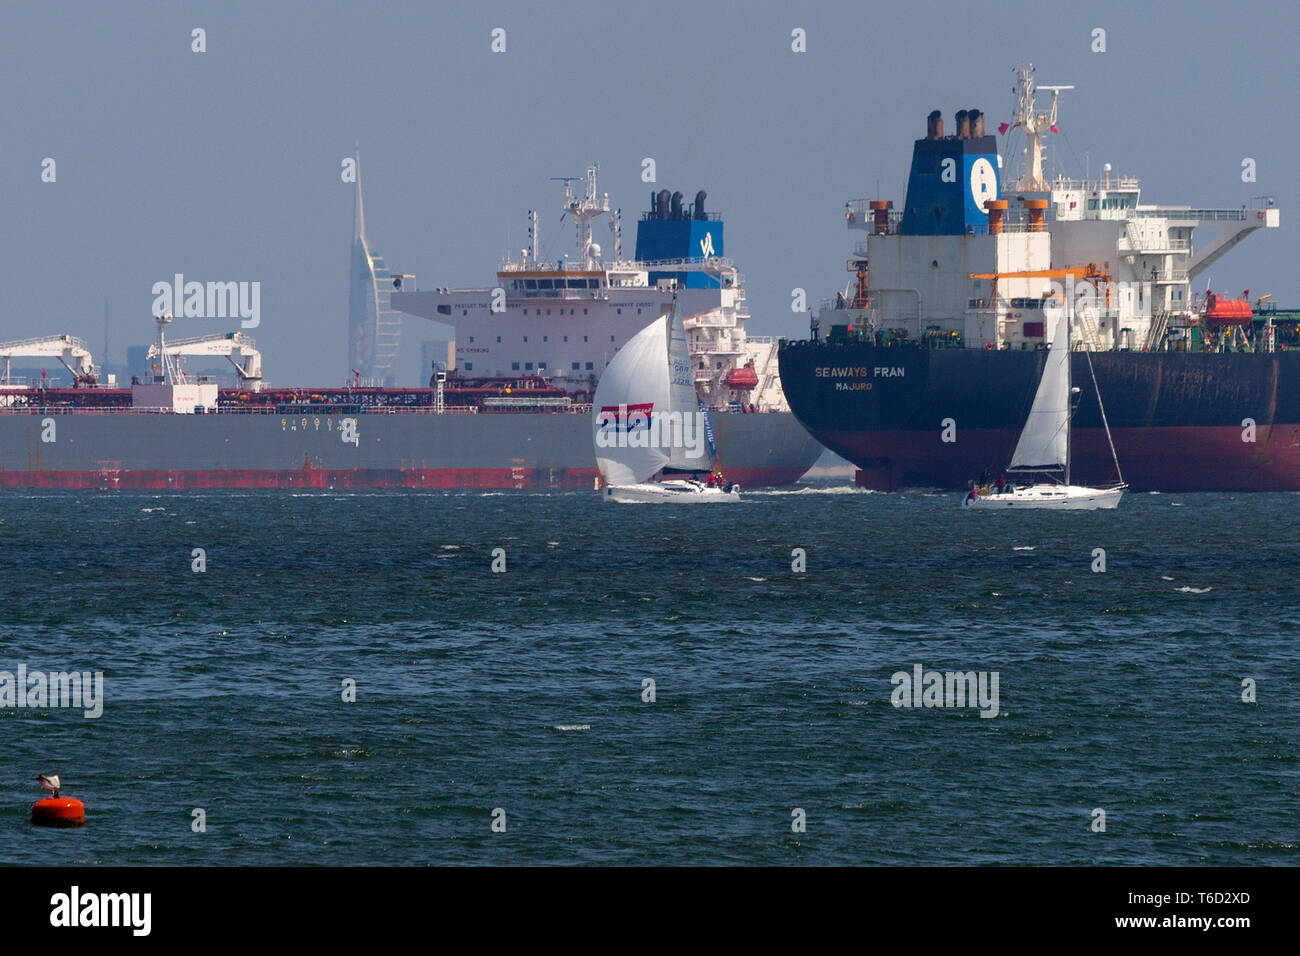 Kyrakatingo,Valletta,Voith,Schneider,power,system,propulsion,very busy shipping lanes,Yachts,boats,traffic,Tanker,Oil,Refinery,Fawley,The Solent Stock Photo